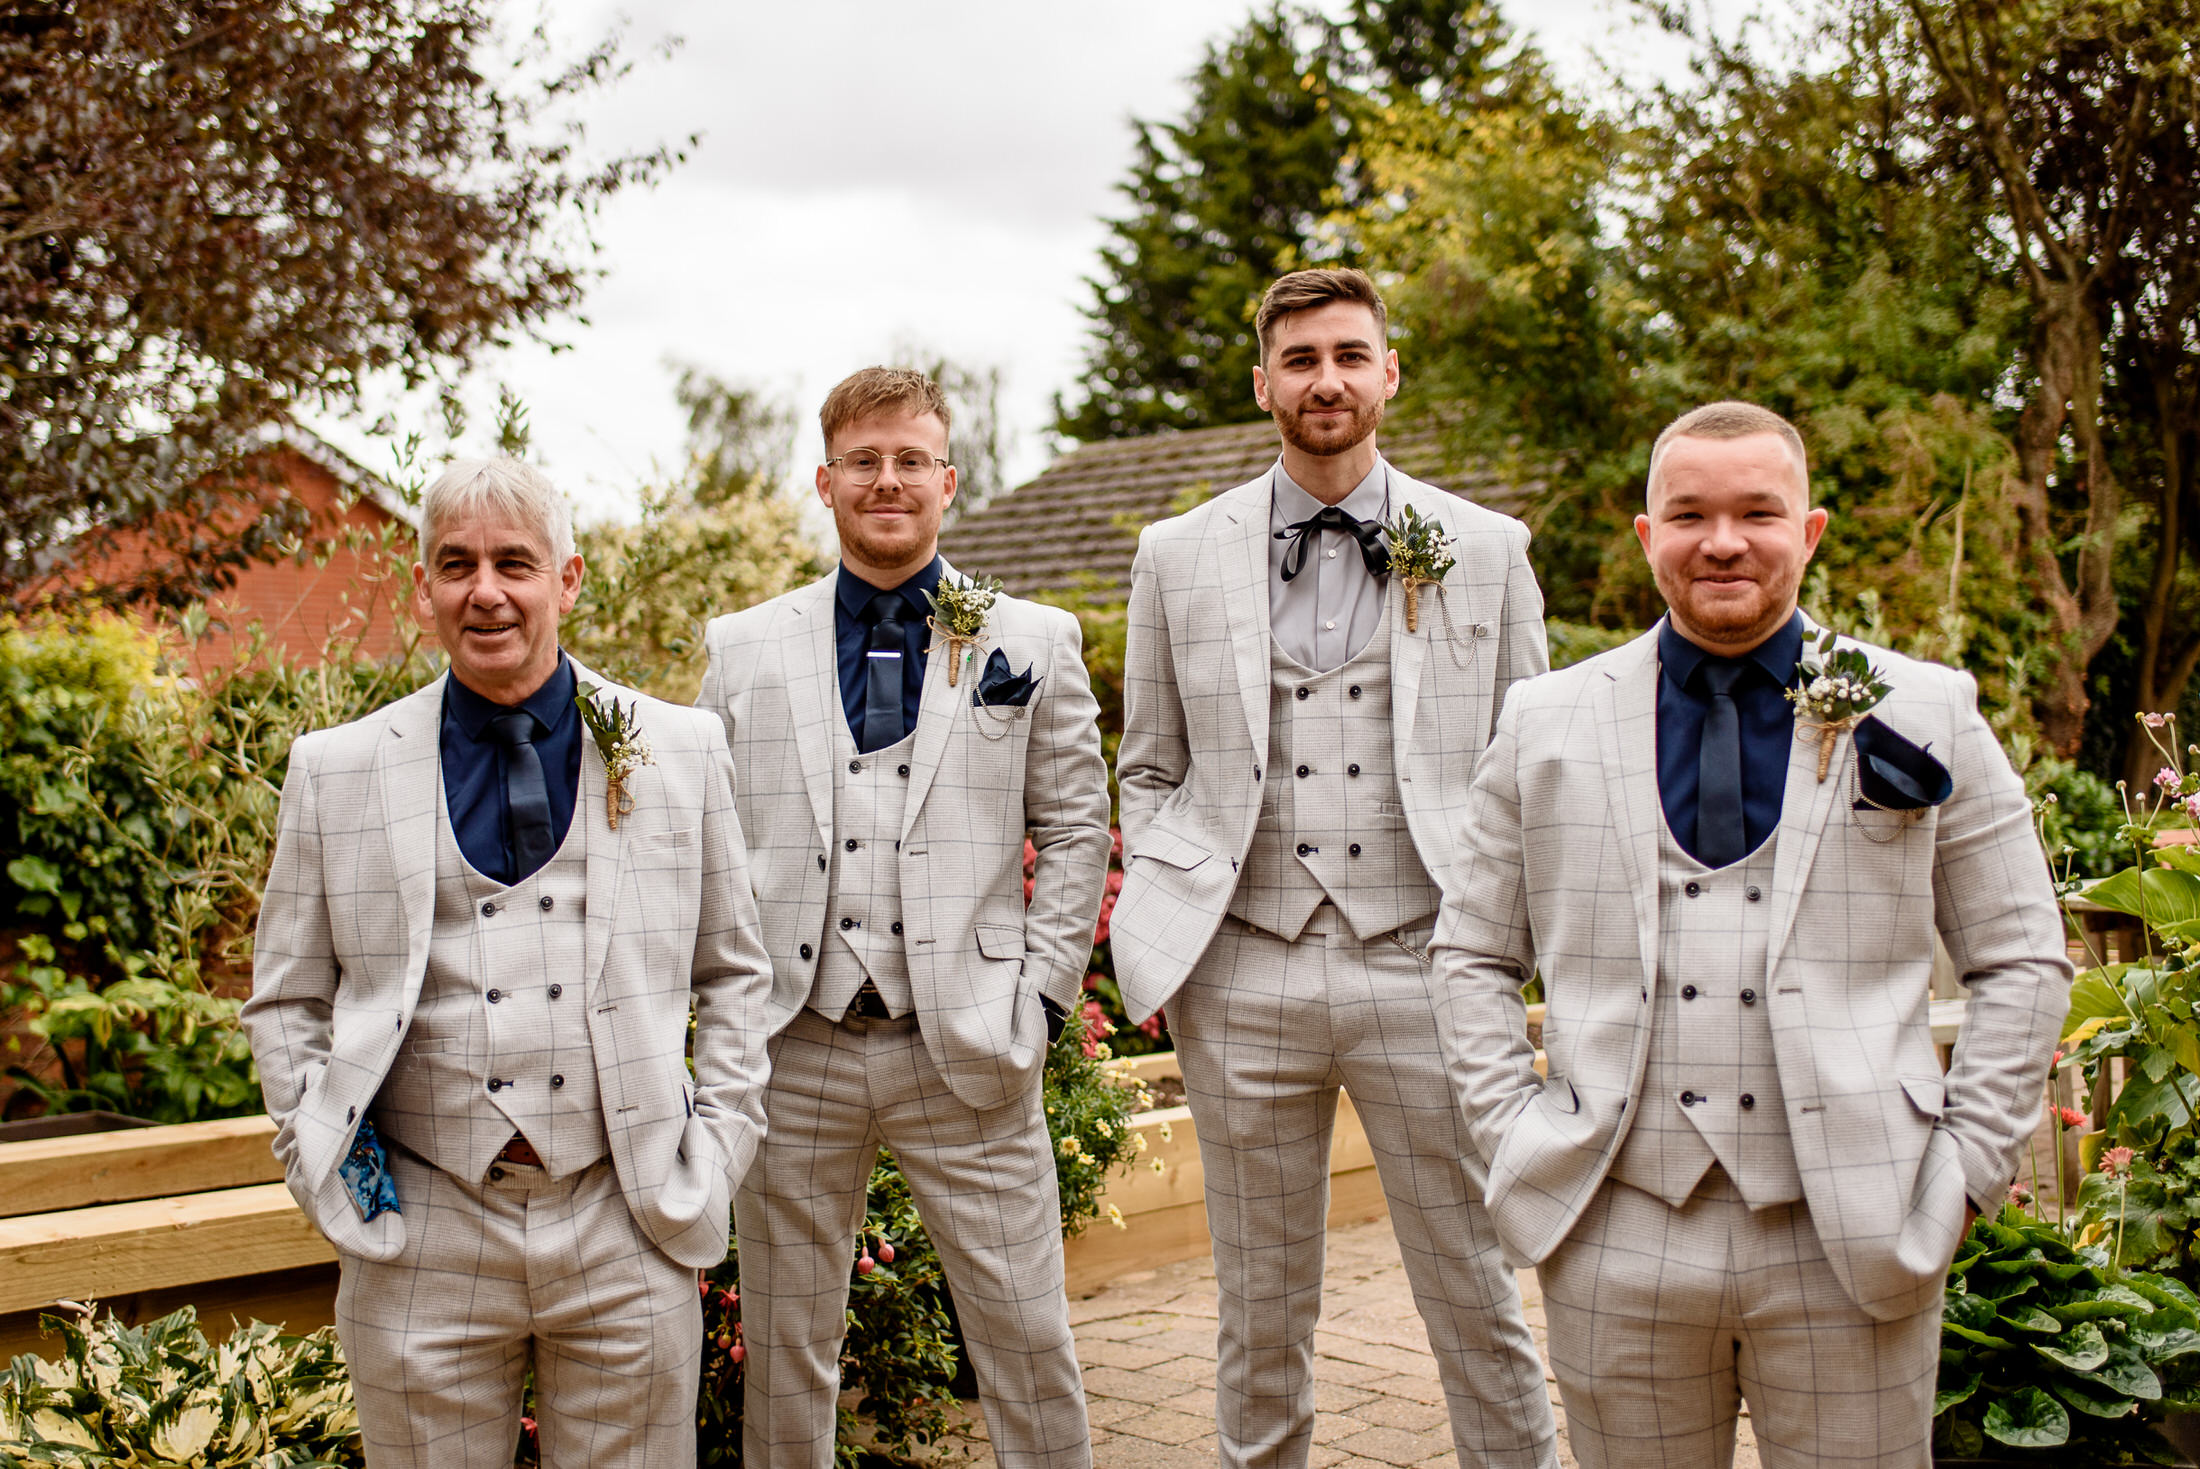 A group of groomsmen posing for a photo at a wedding.